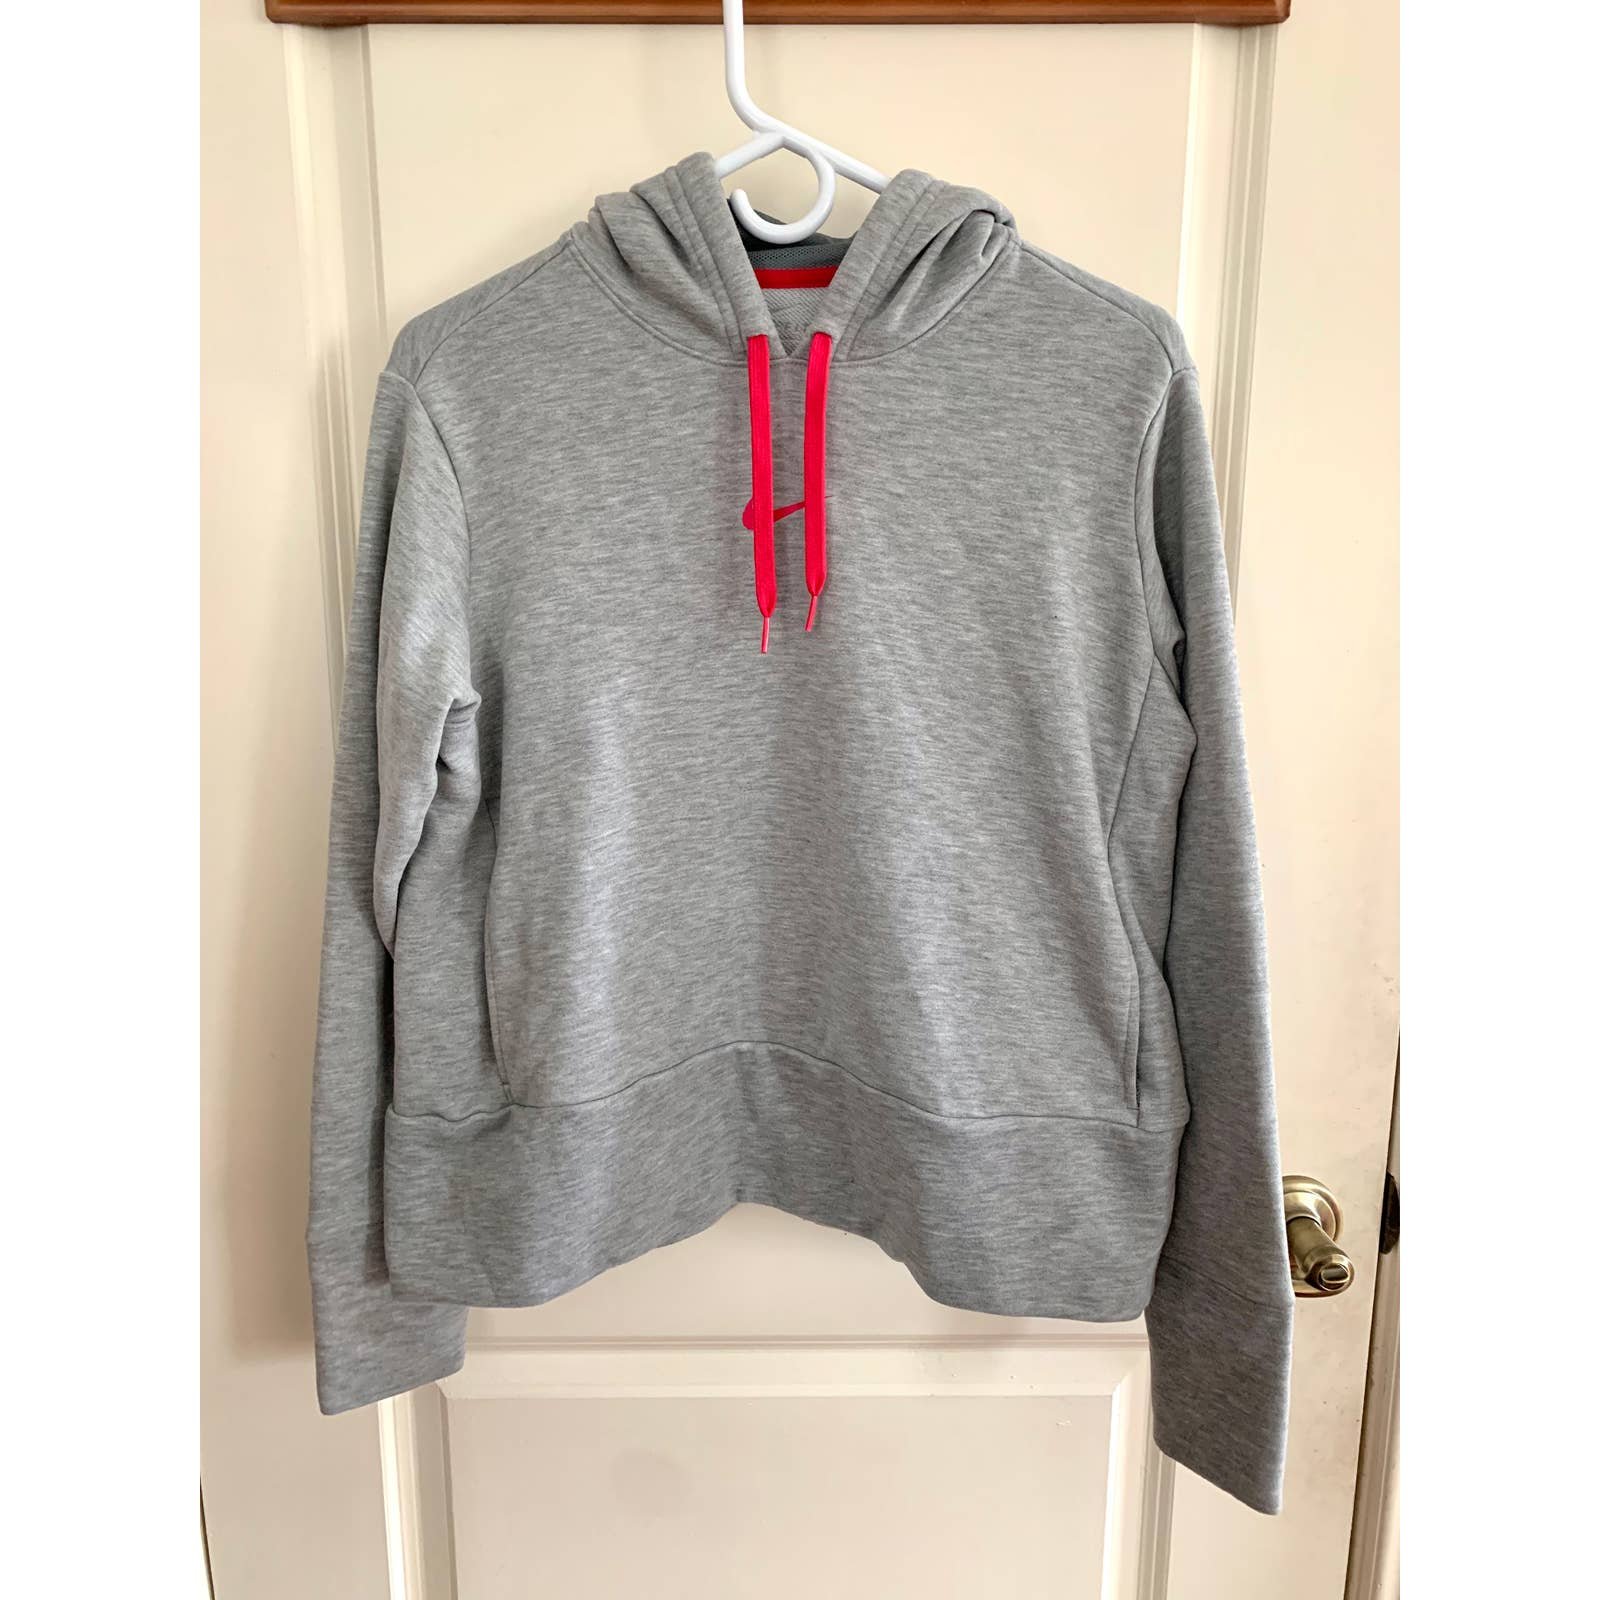 Stylish Nike Heathered Hoodie in Pink/Gray with Pocket 